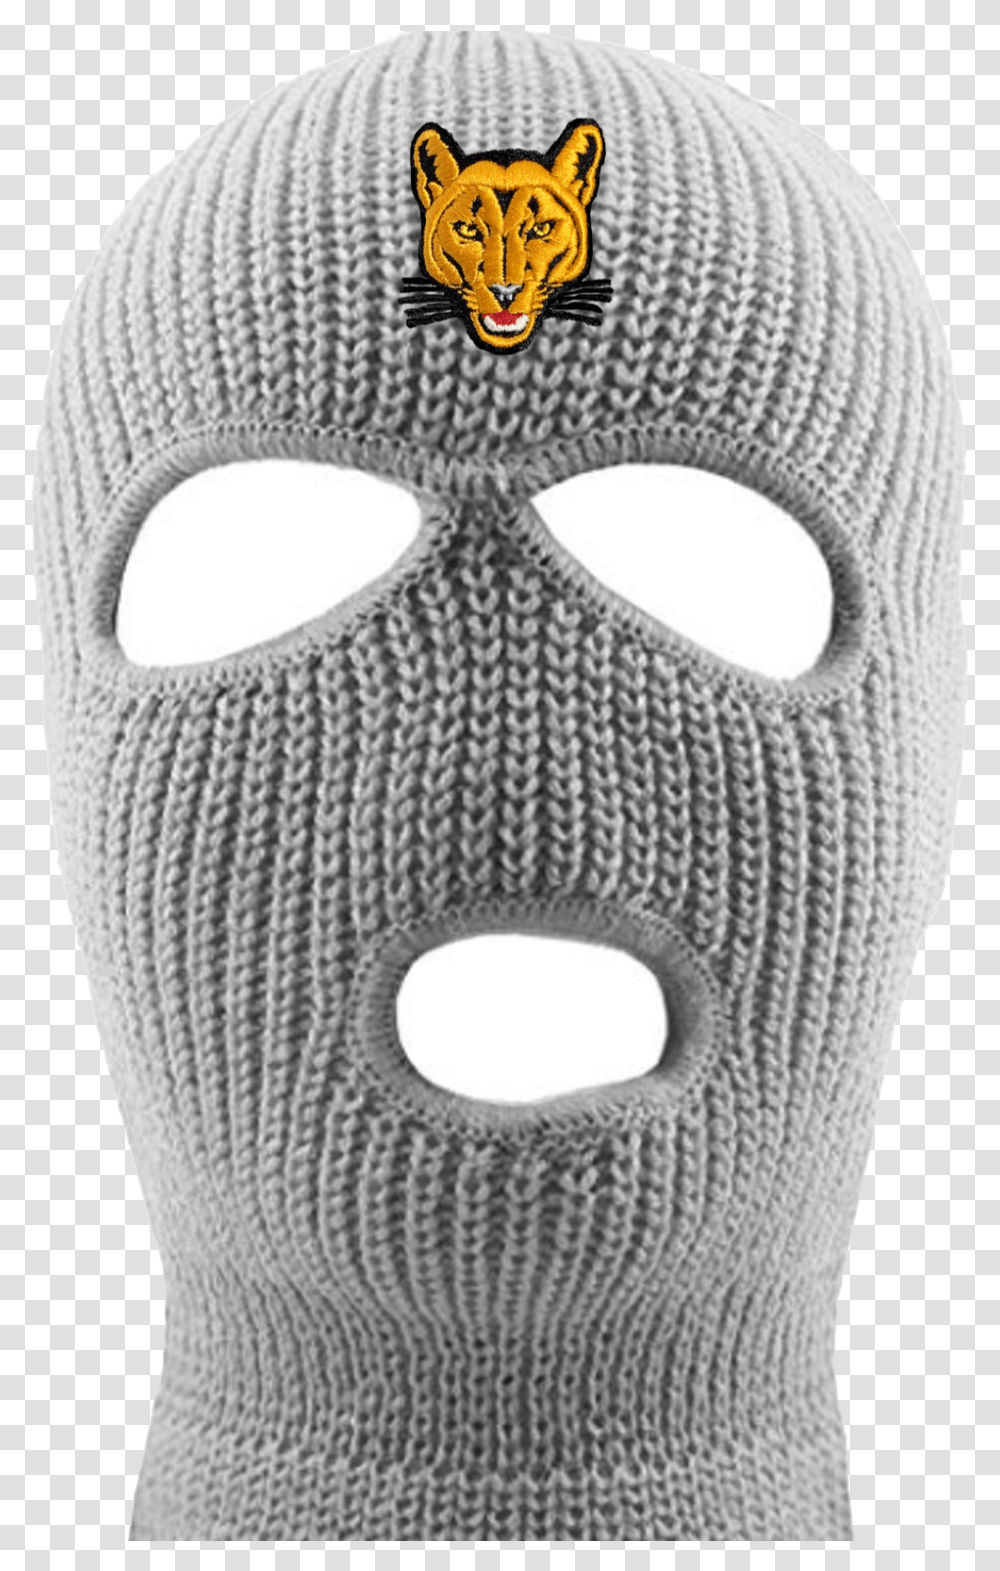 Swanky Ski Mask For Adult, Cushion, Pillow, Sweater, Clothing Transparent Png